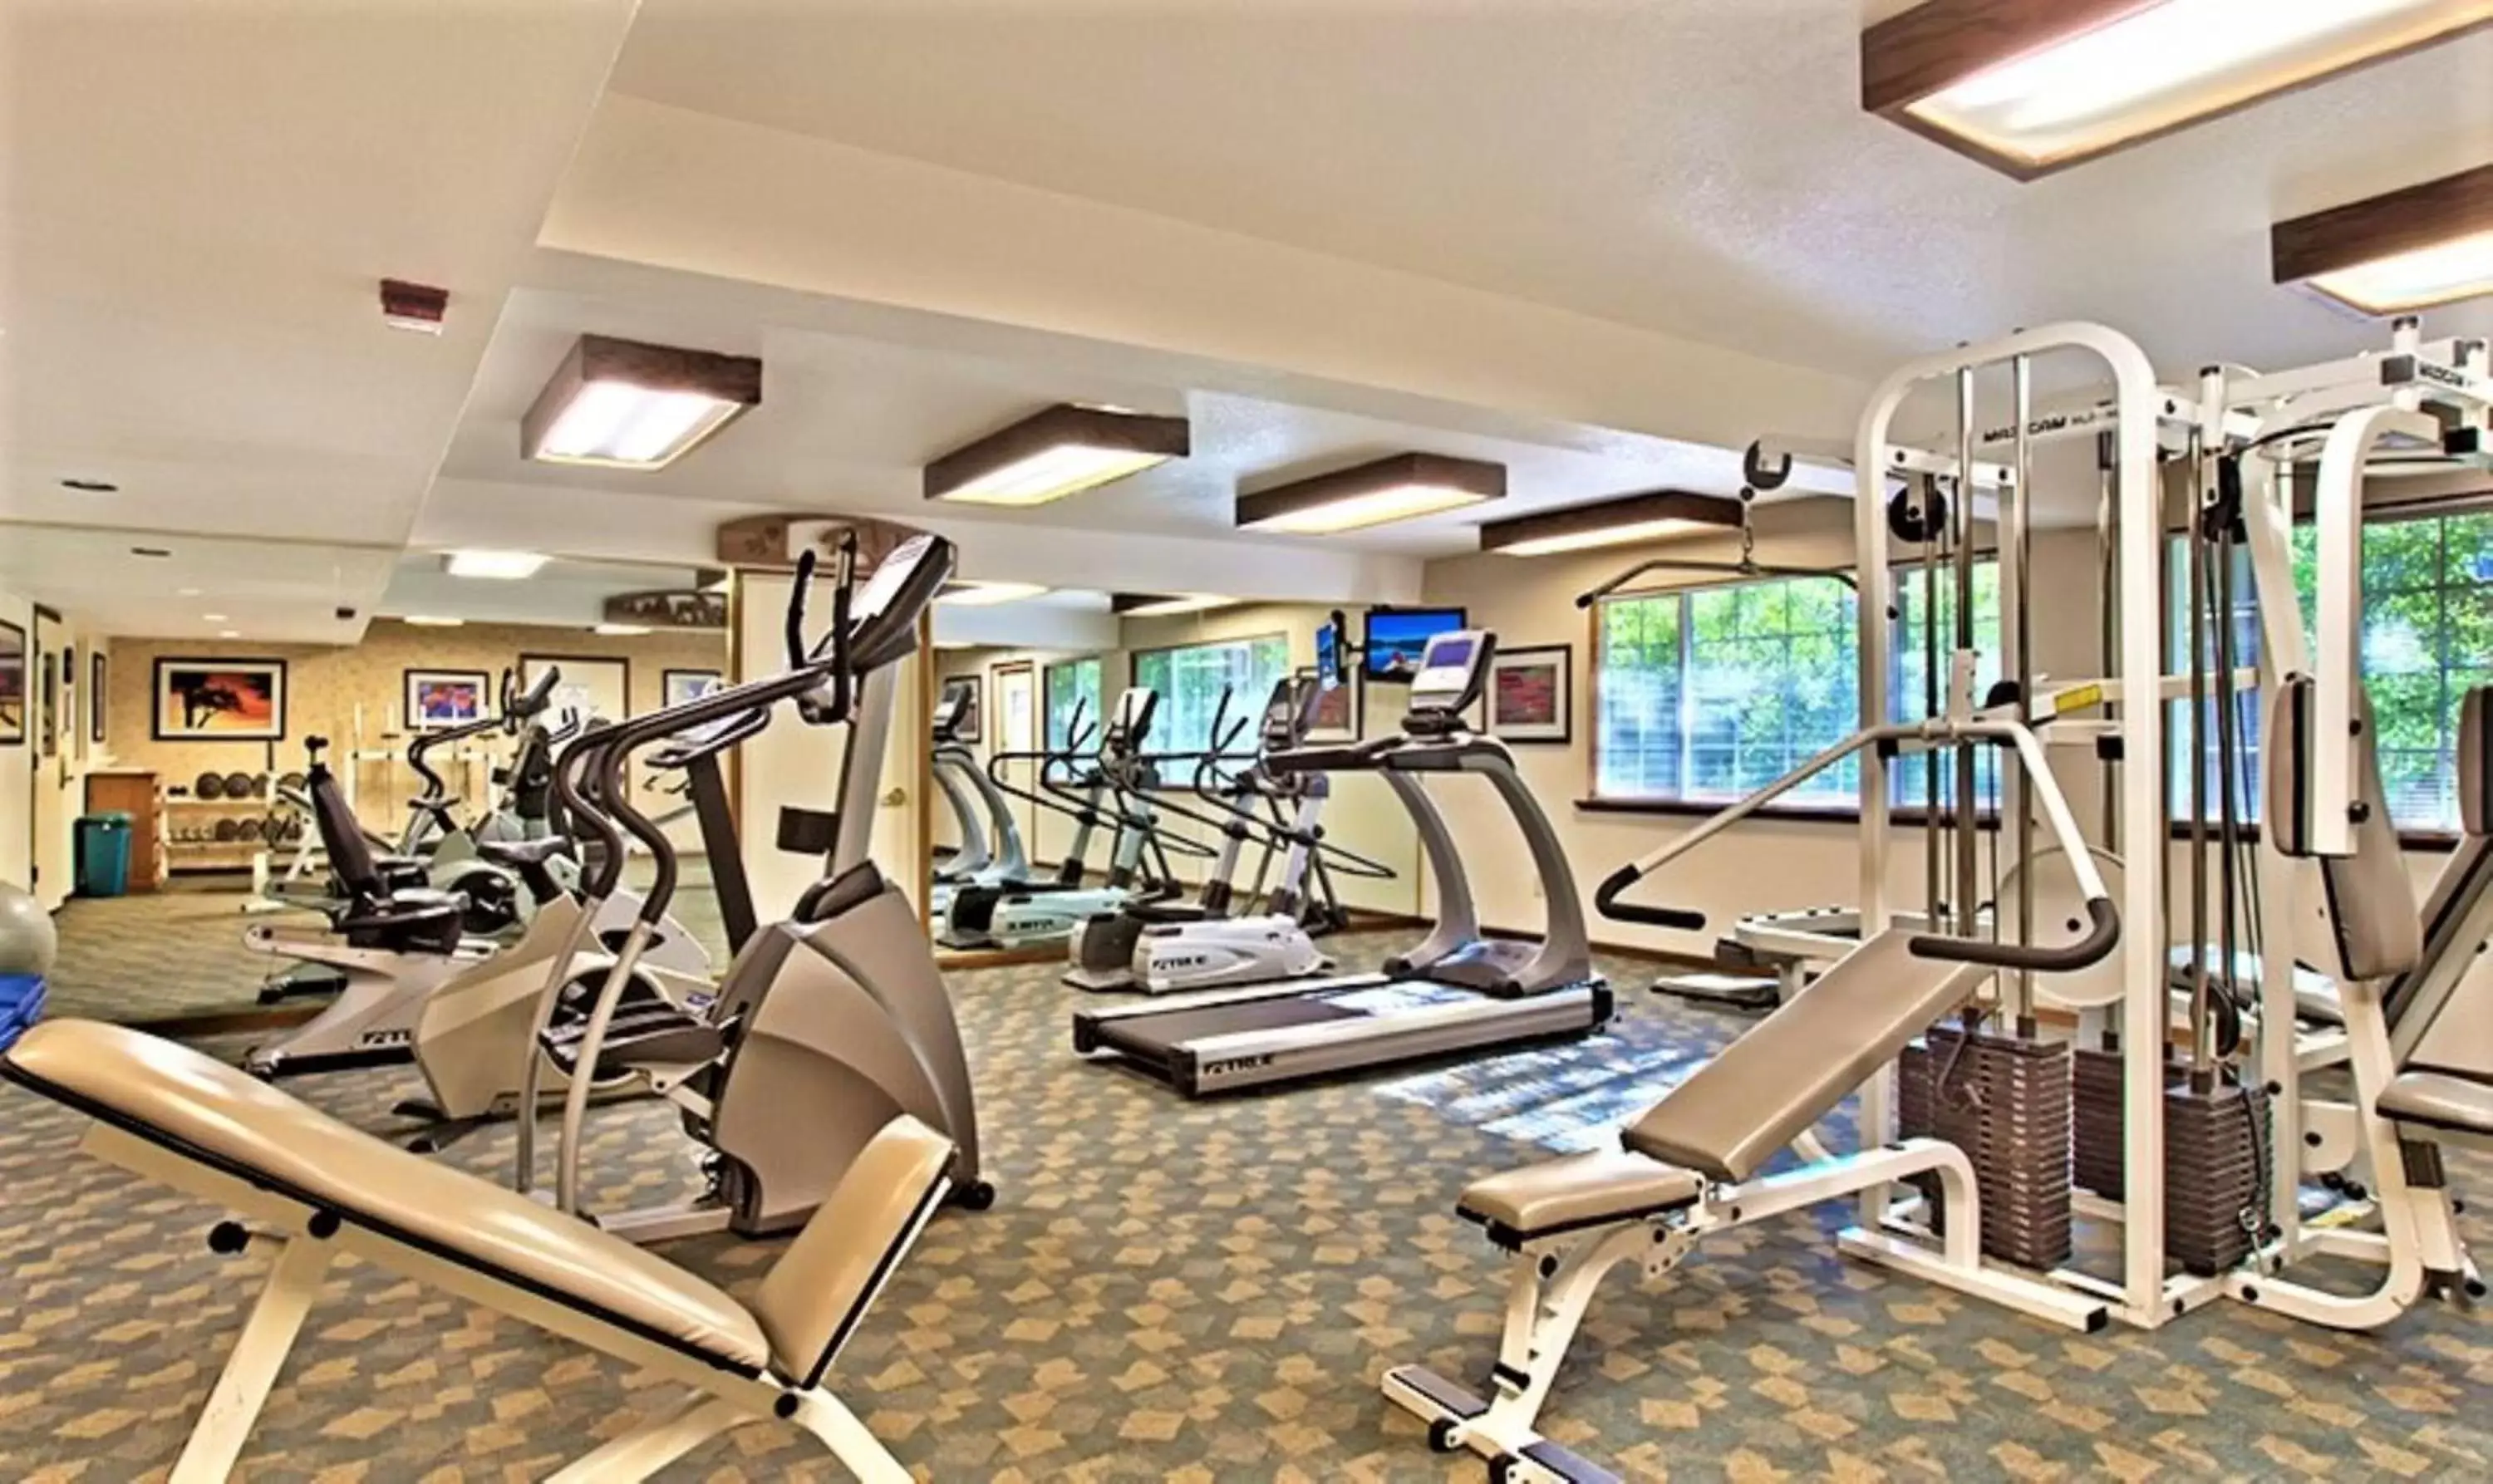 Fitness centre/facilities, Fitness Center/Facilities in The Tahoe Beach & Ski Club Owners Association